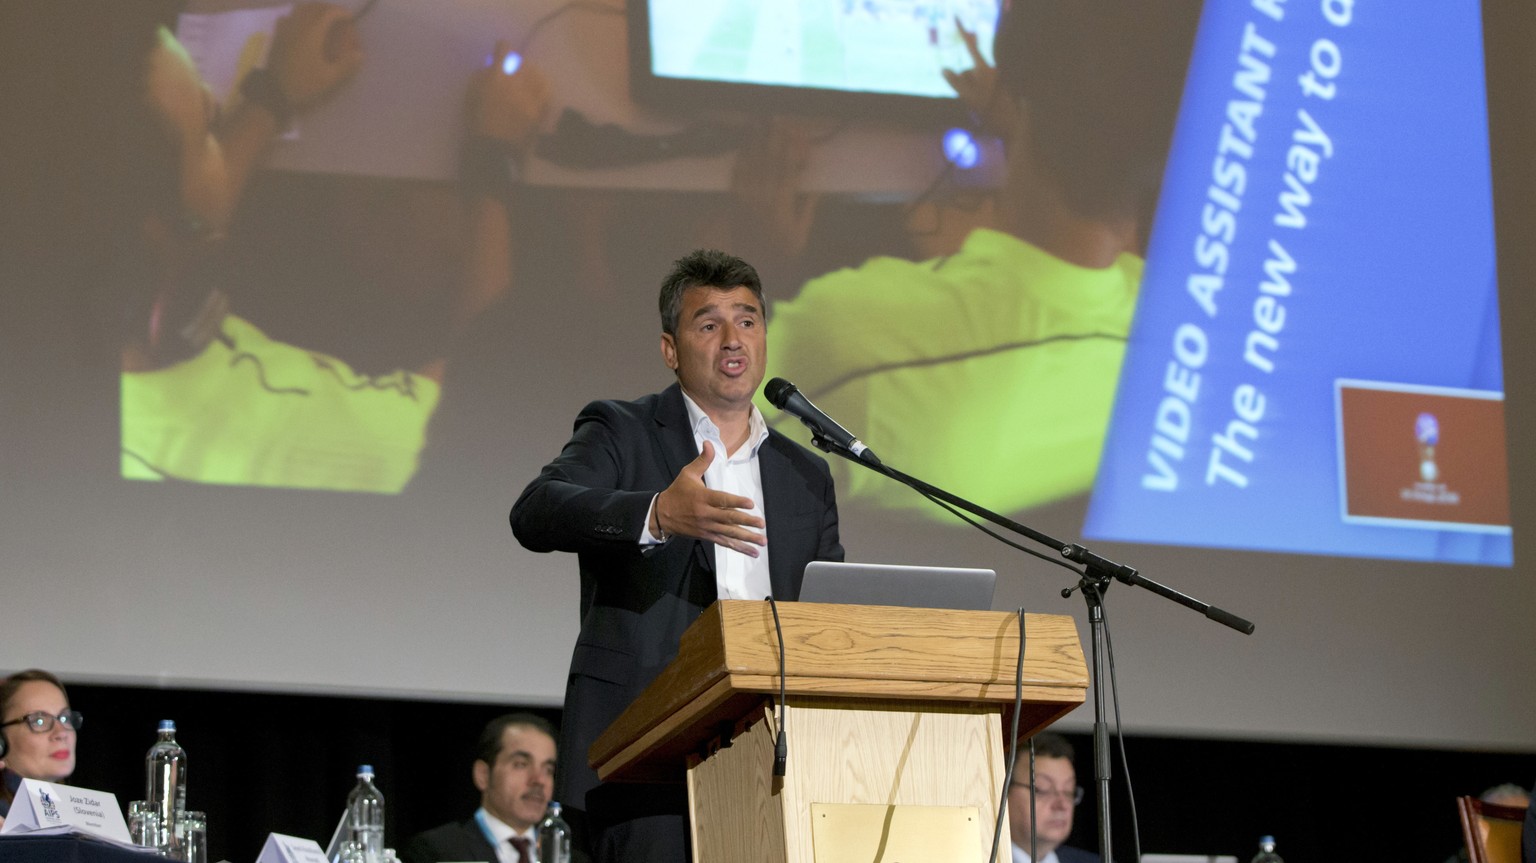 Switzerland&#039;s Massimo Busacca, FIFA-director of the Department of Refereeing Developments speaks during a media conference regarding the Video Assistant Referee (VAR) at a hotel in Brussels on Tu ...